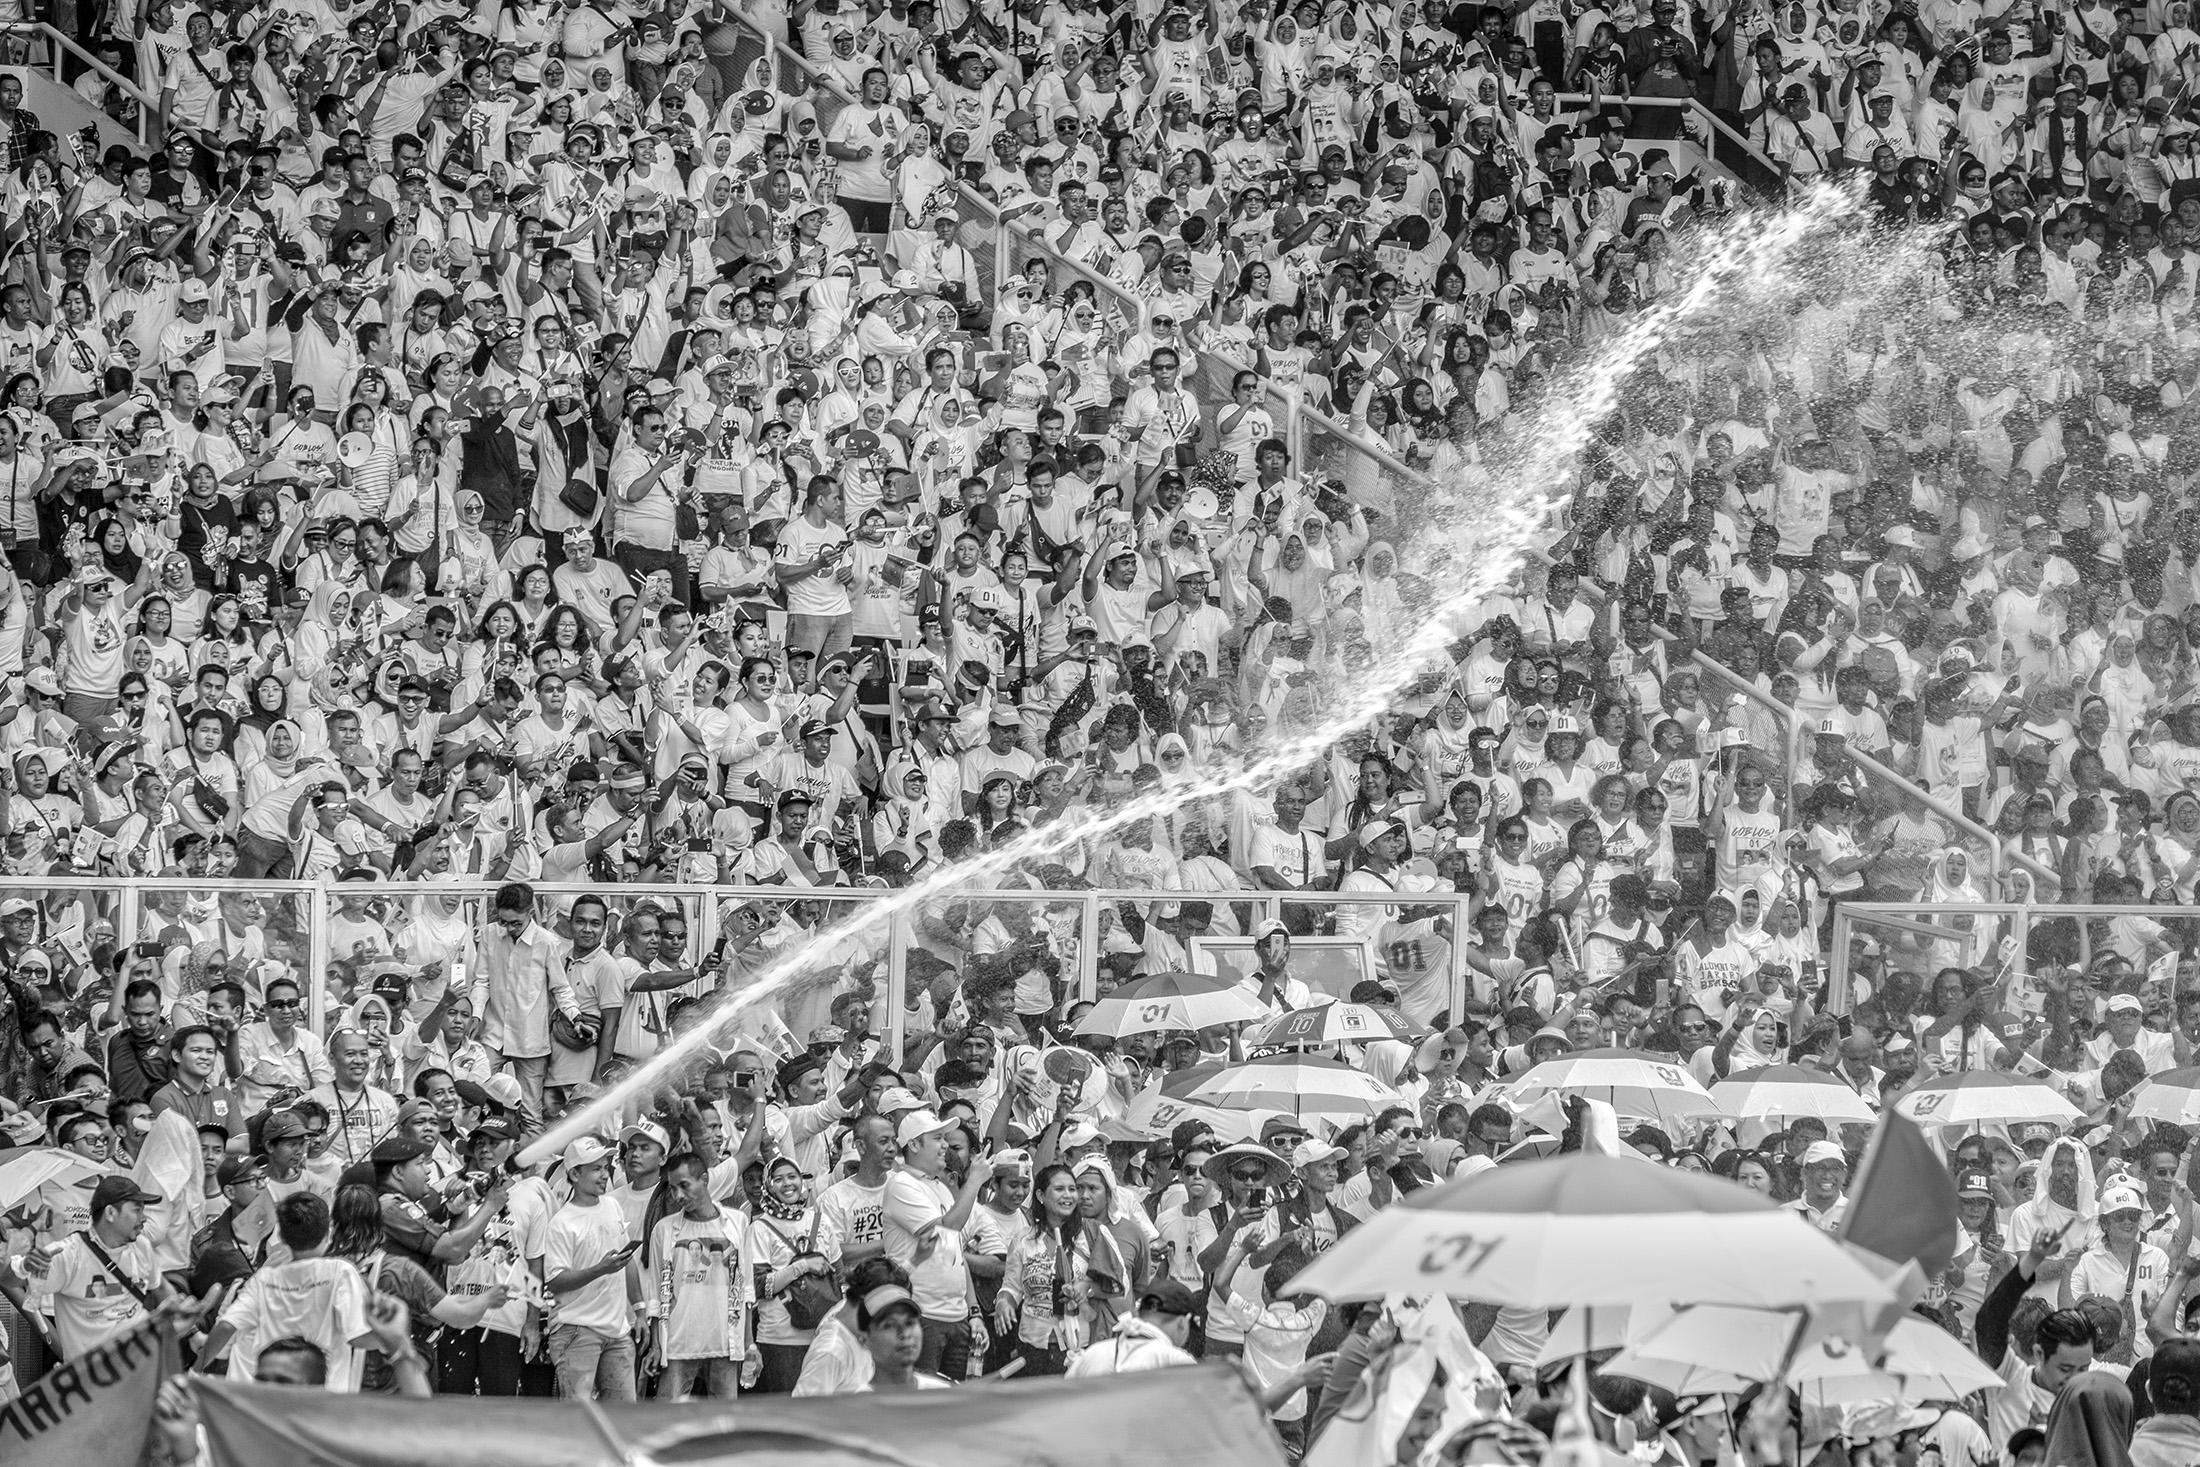 Indonesia -   A fireman spray water to keep supporters of...